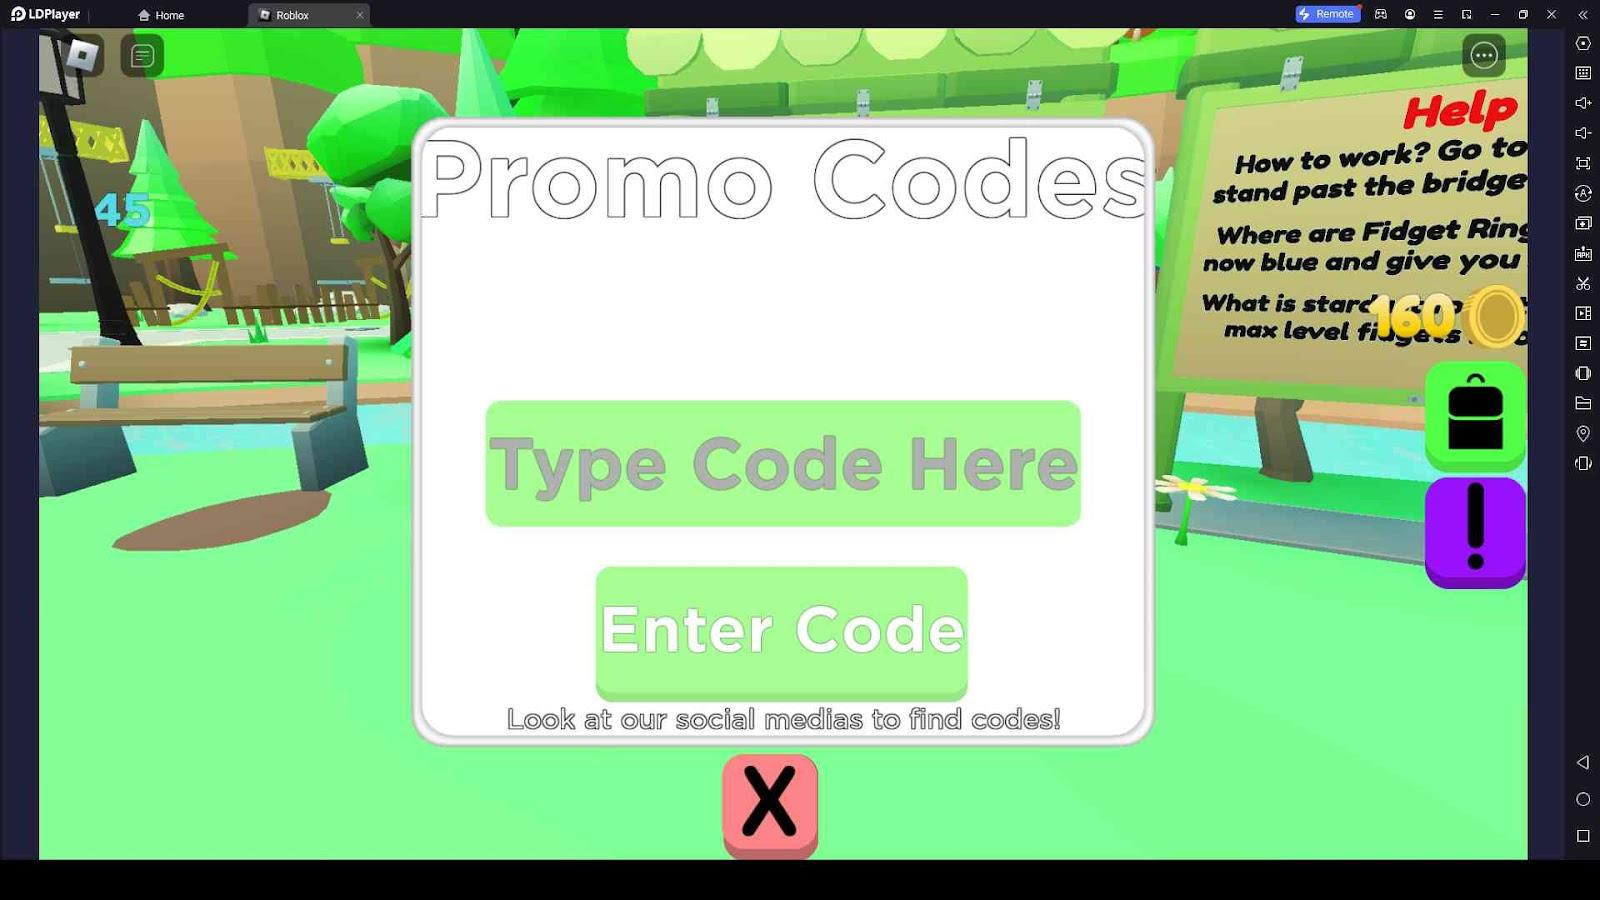 How To Redeem Codes in Adopt Me - Roblox